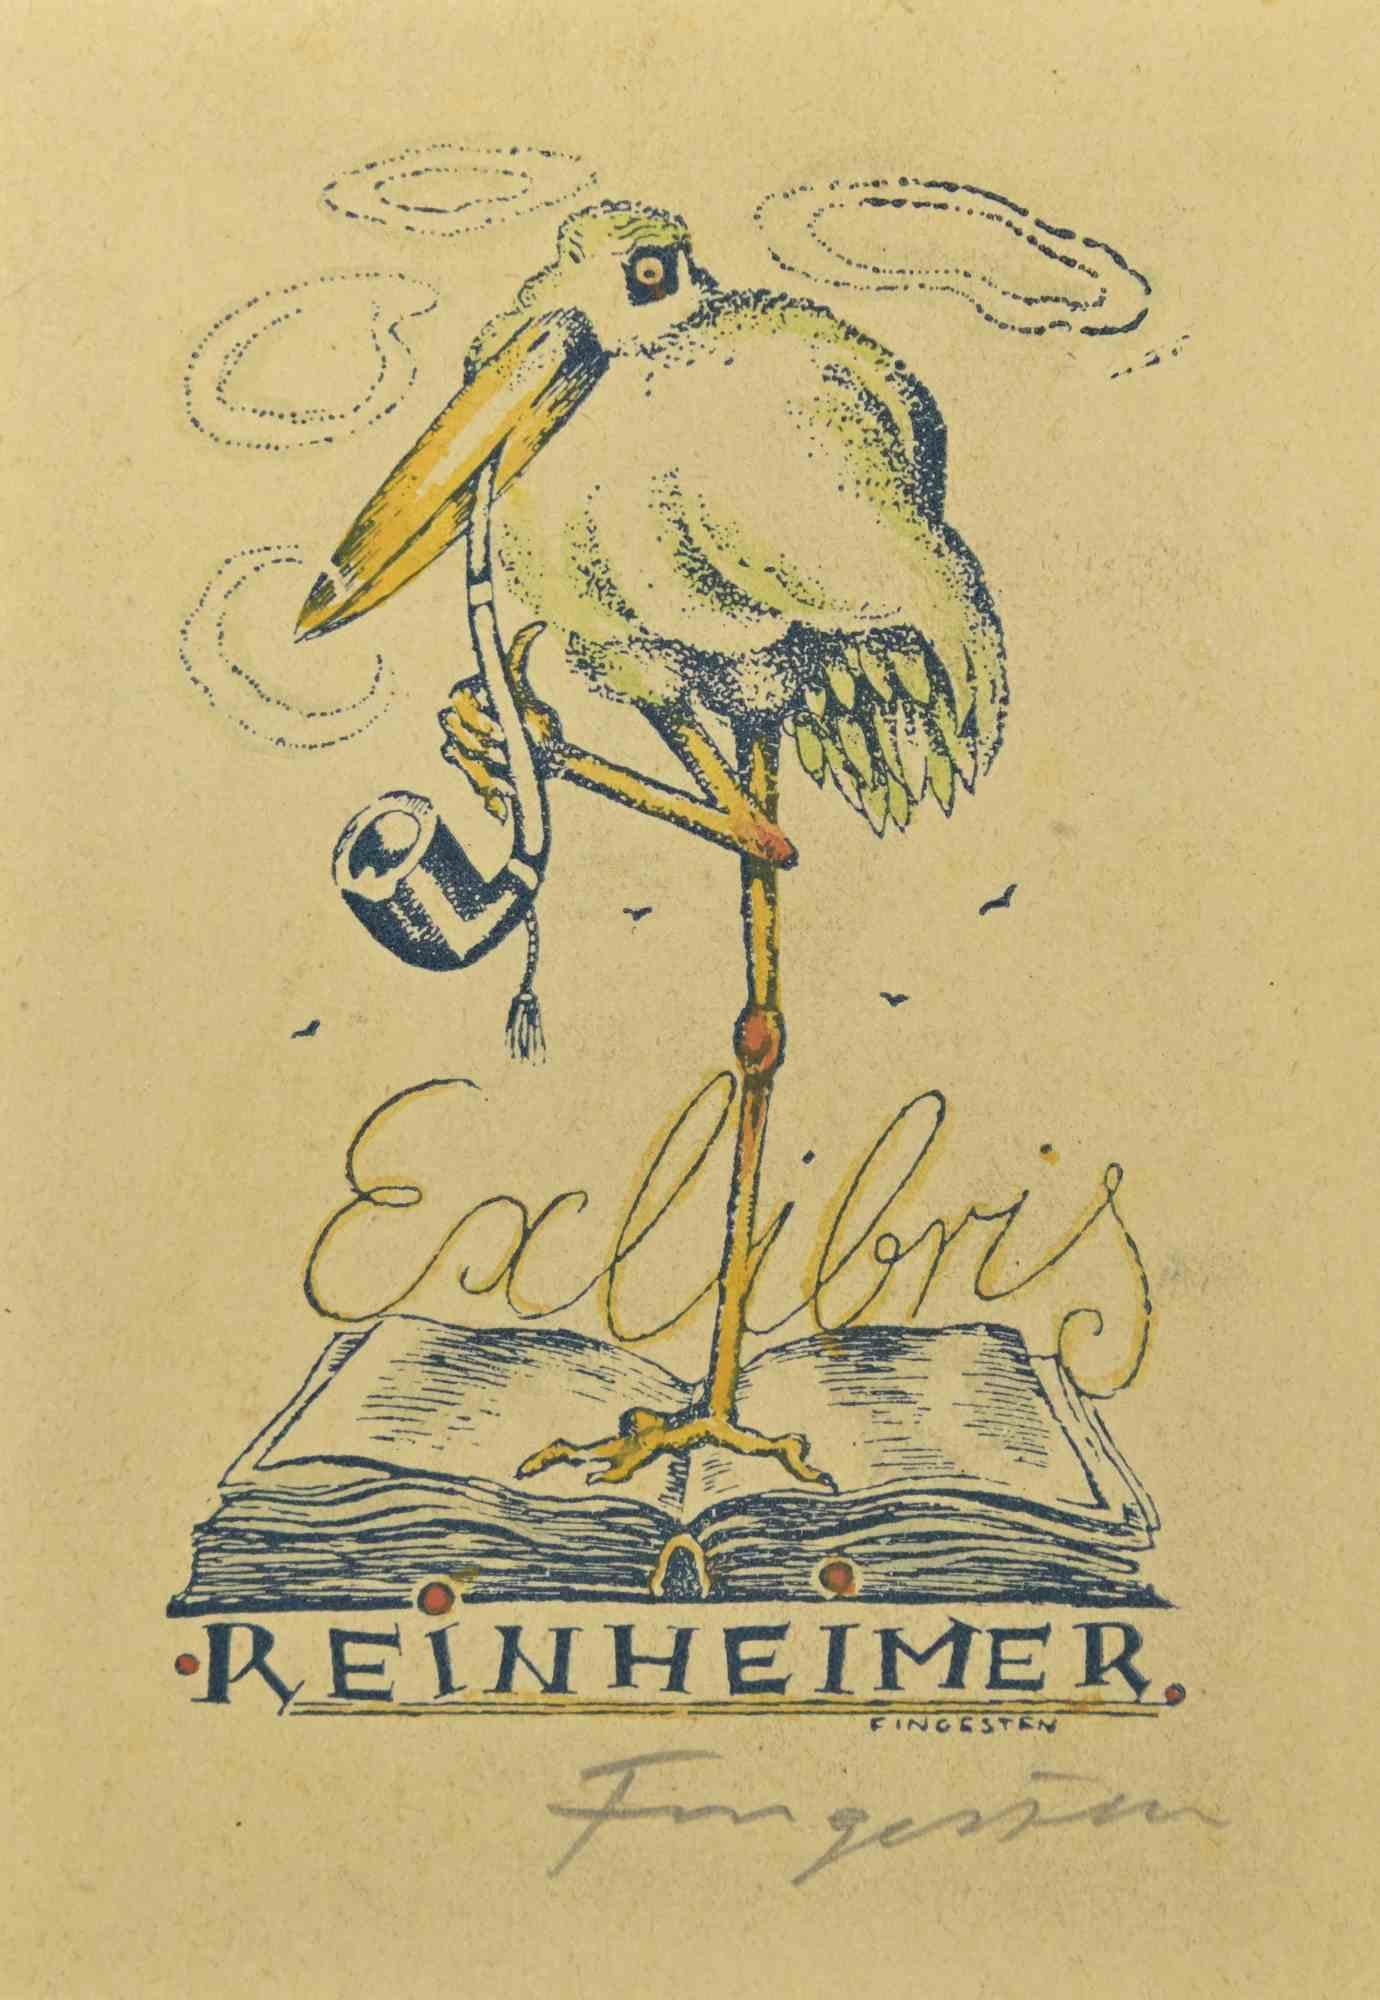 Ex Libris - Reinheimer is a colored woodcut print created by  Michel Fingesten.

Hand Signed on   the lower right margin.

Good conditions.

Michel Fingesten (1884 - 1943) was a Czech painter and engraver of Jewish origin. He is considered one of